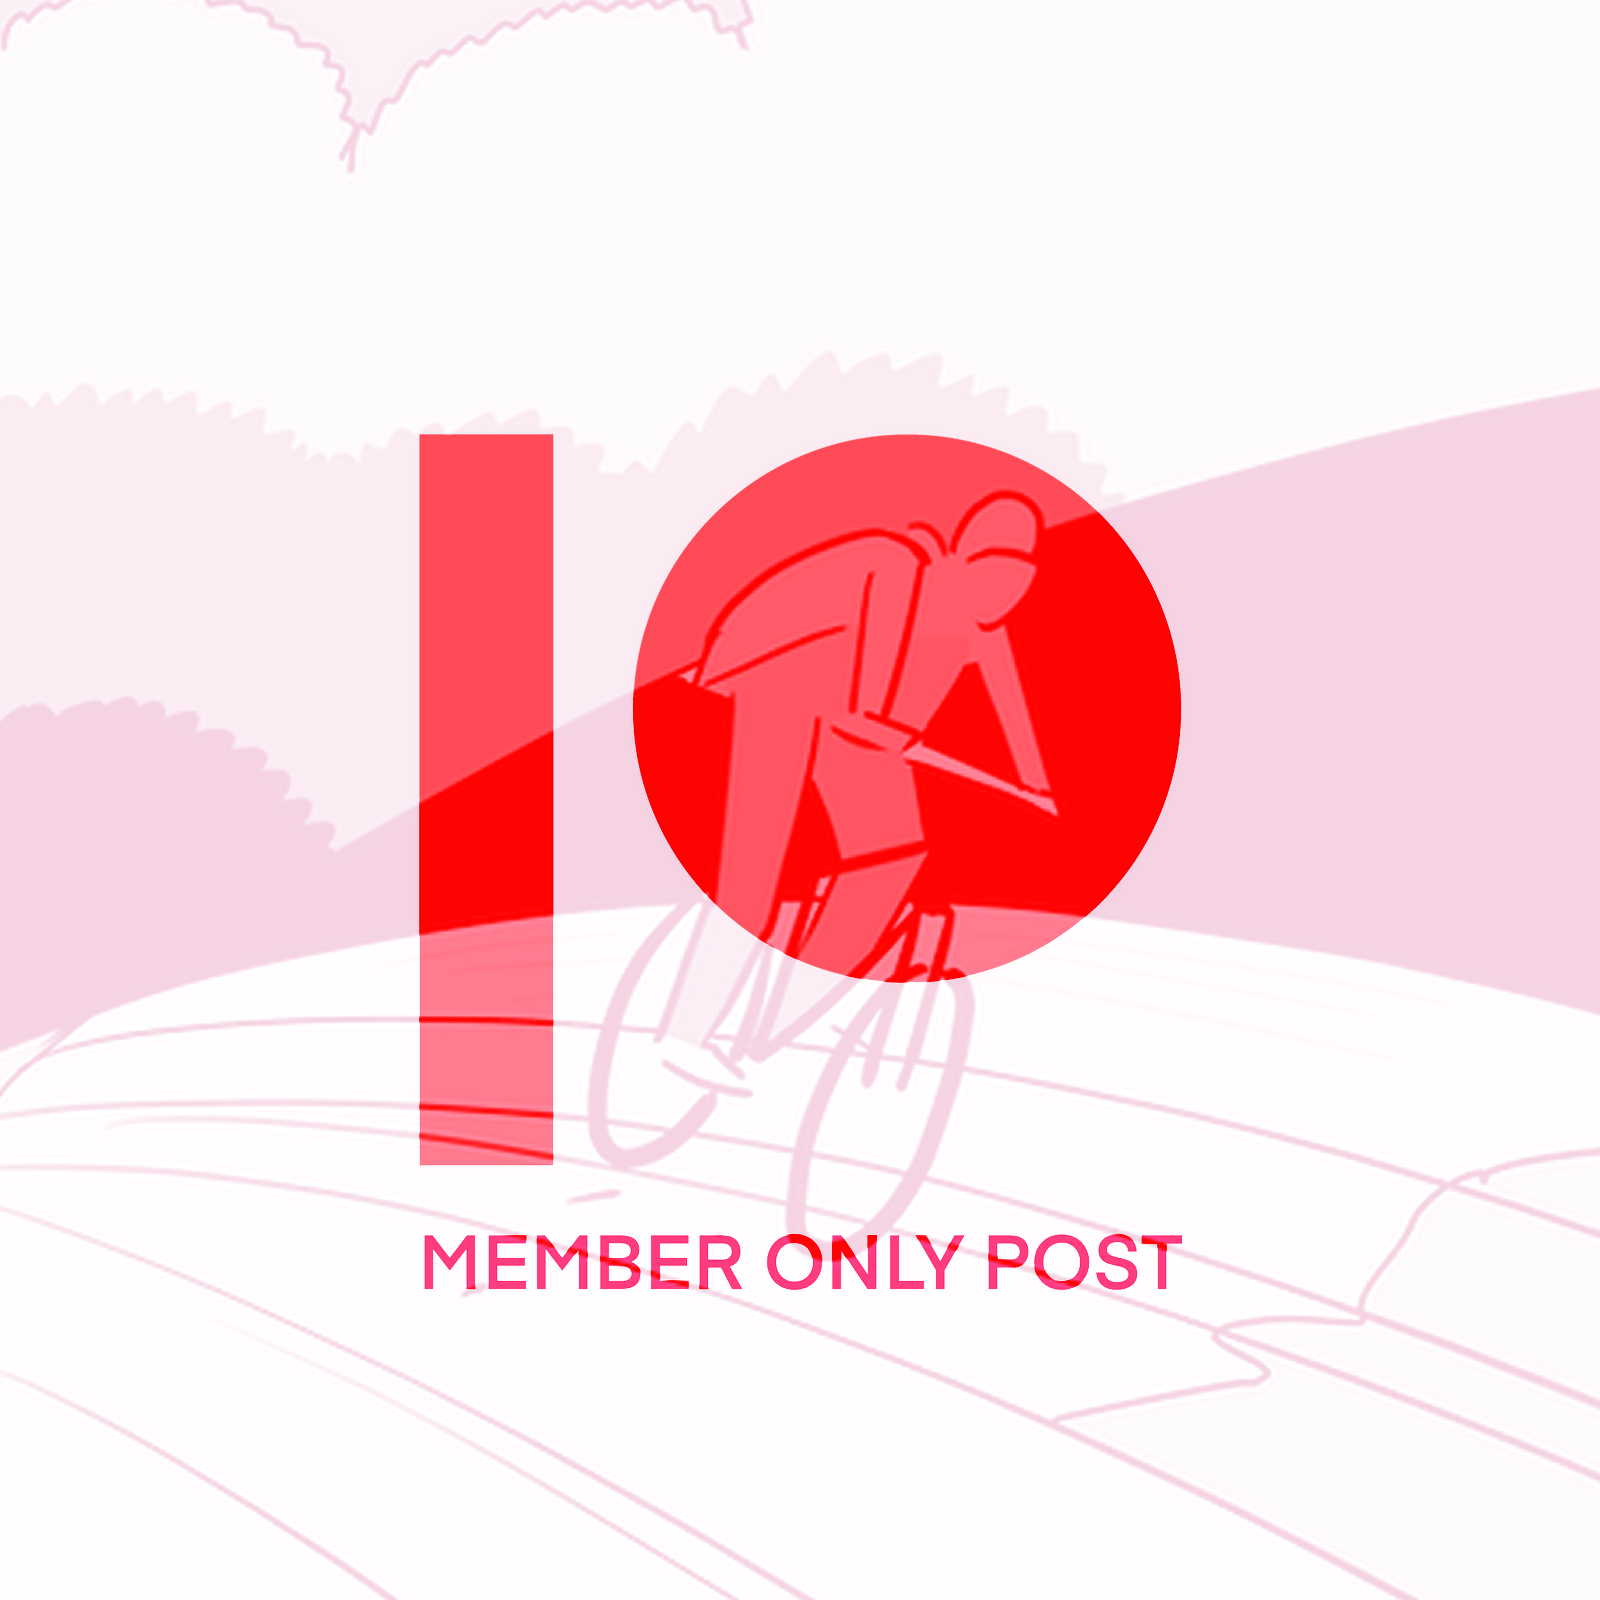 "Member Only Post" a loose drawing of a person riding a bicycle on a hill. 